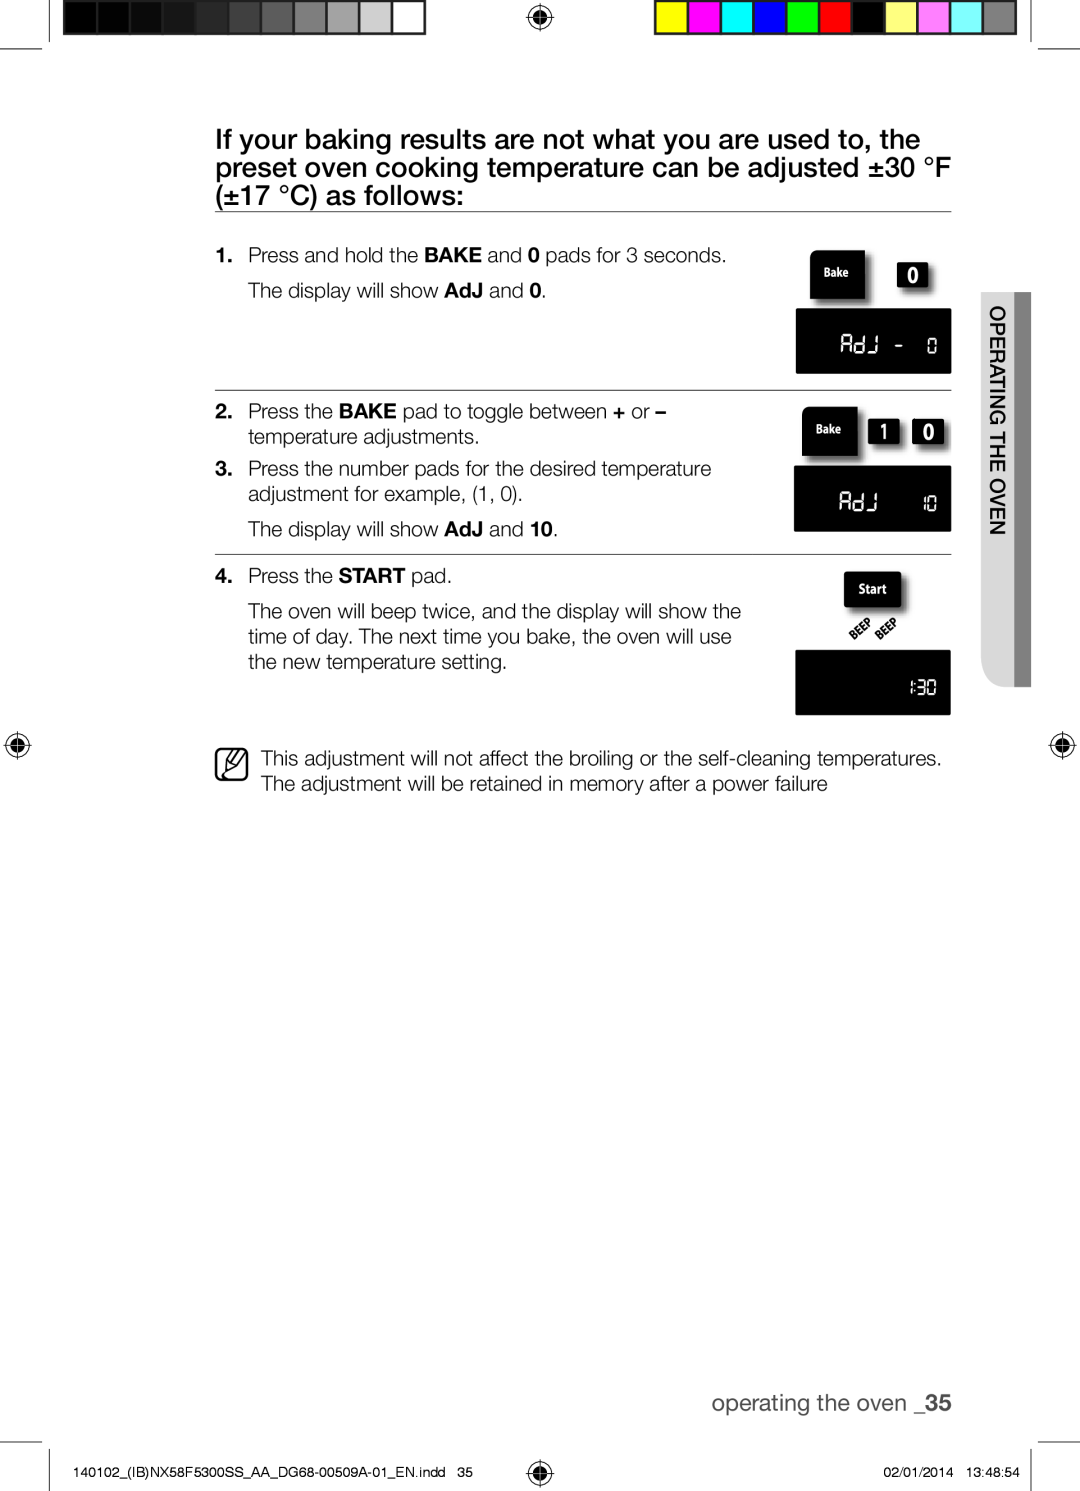 Samsung NX58F5500SW user manual operating the oven 